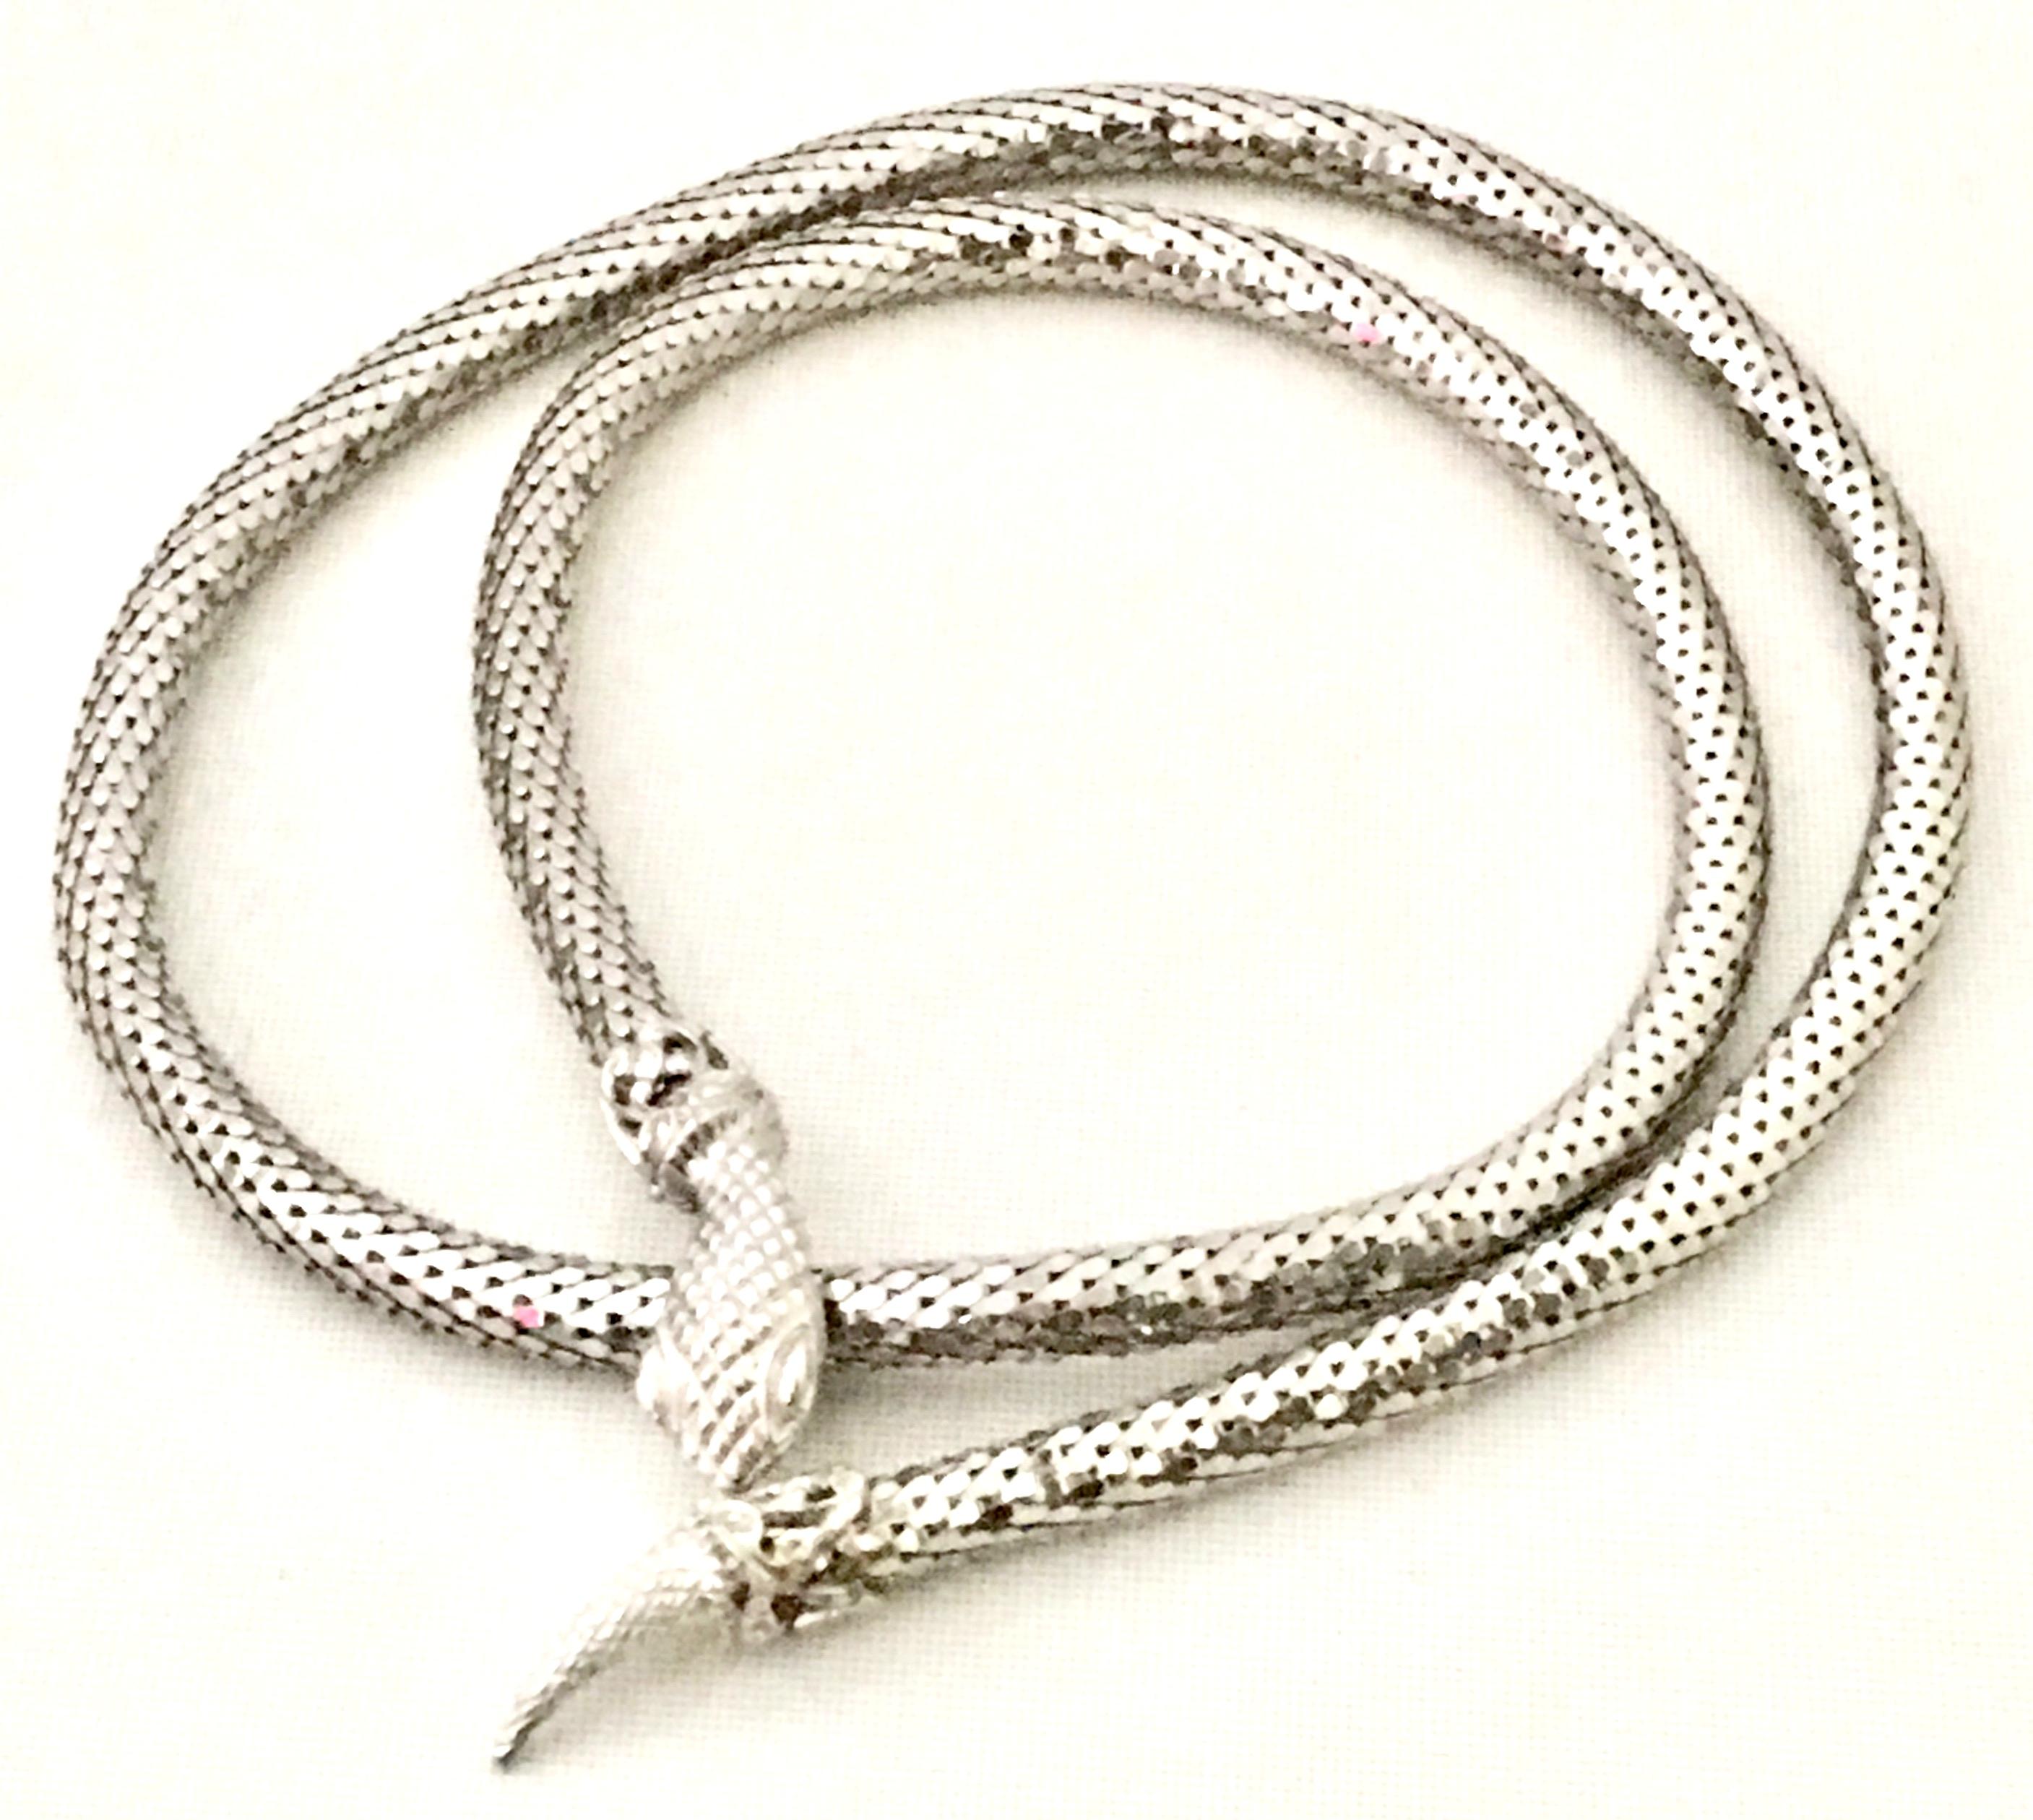 20th Century Silver Metal Mesh Snake Necklace Or Belt By, Whiting & Davis 2